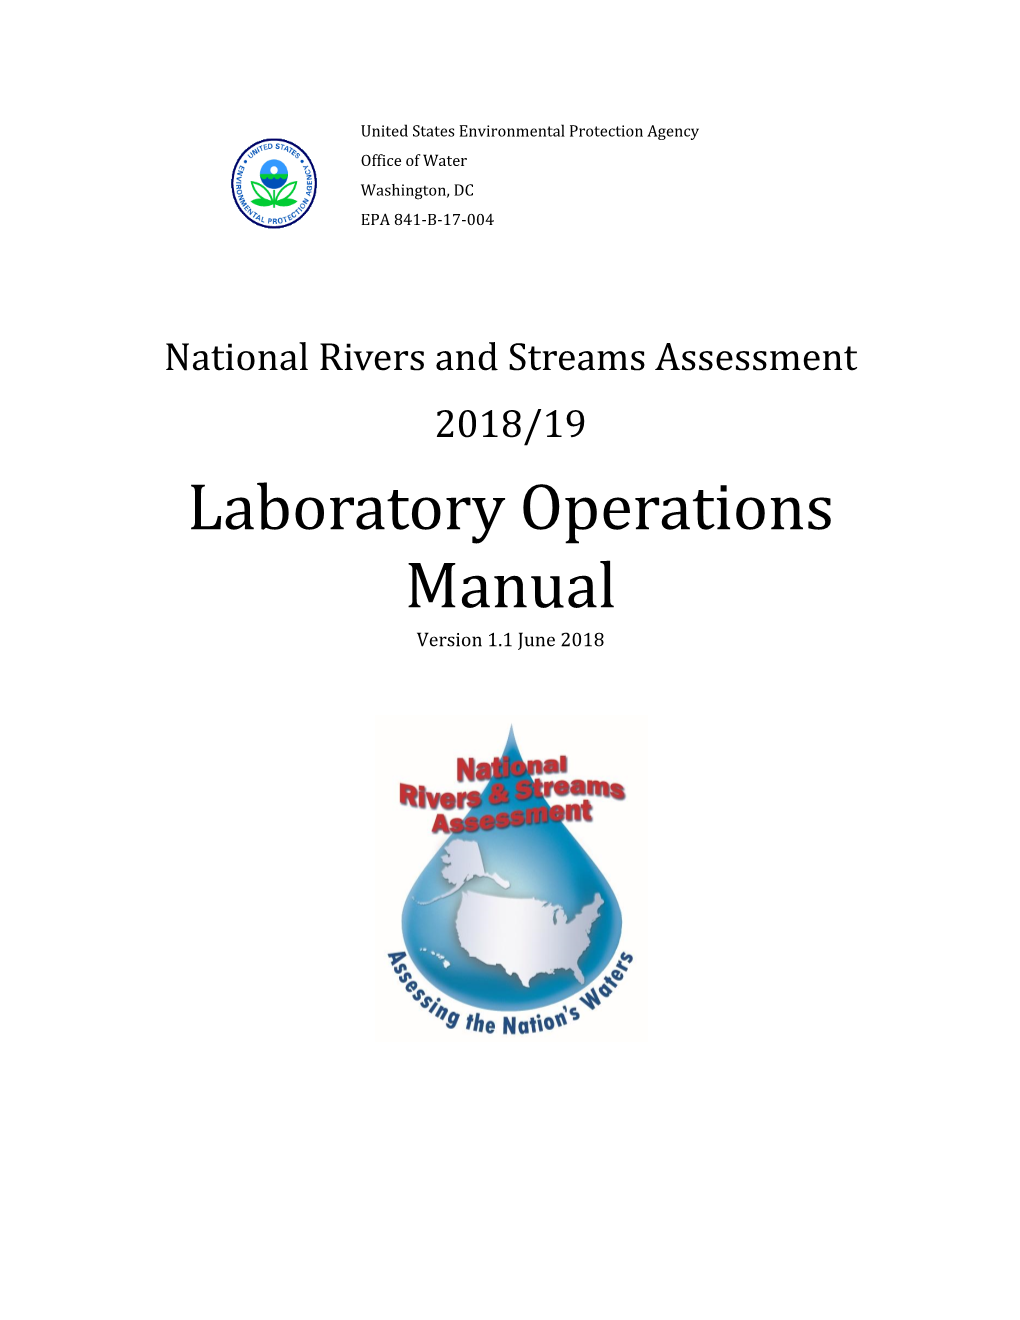 National Rivers and Streams Assessment 2018/19 Laboratory Operations Manual Version 1.1 June 2018